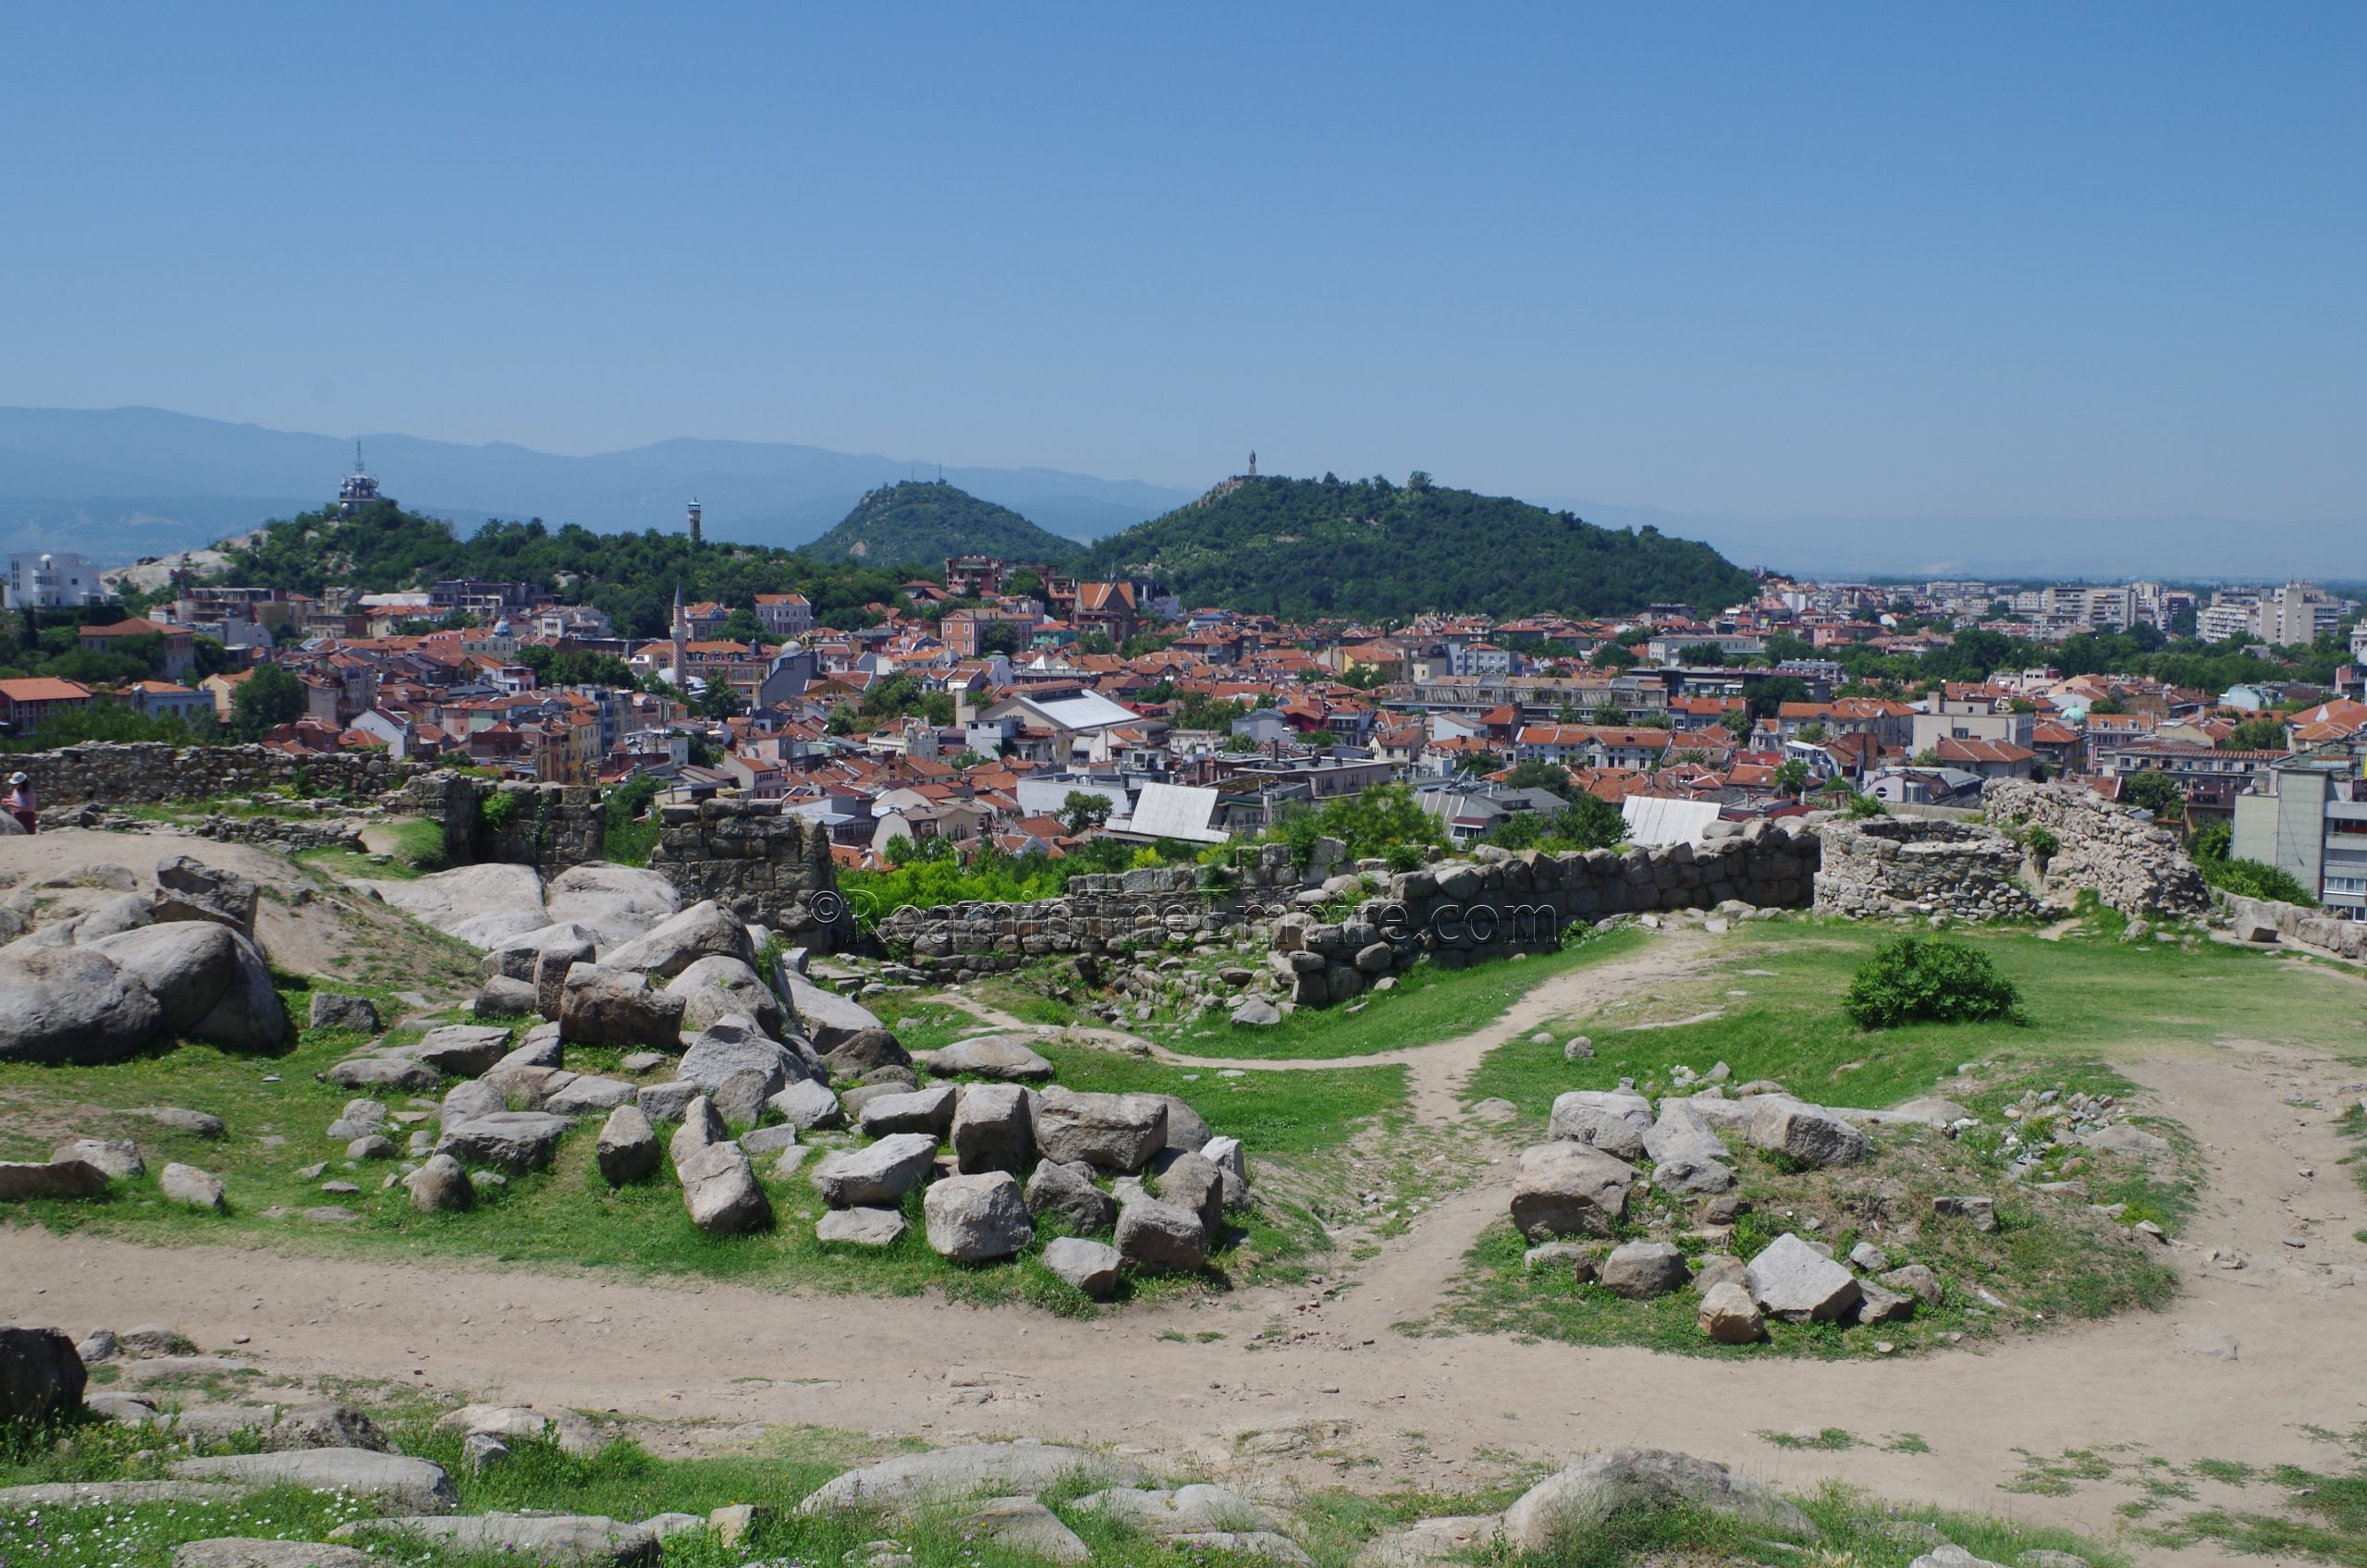 Nebet Tepe, site of the original Thracian settlement, Eumolpias (discussed in the third post).